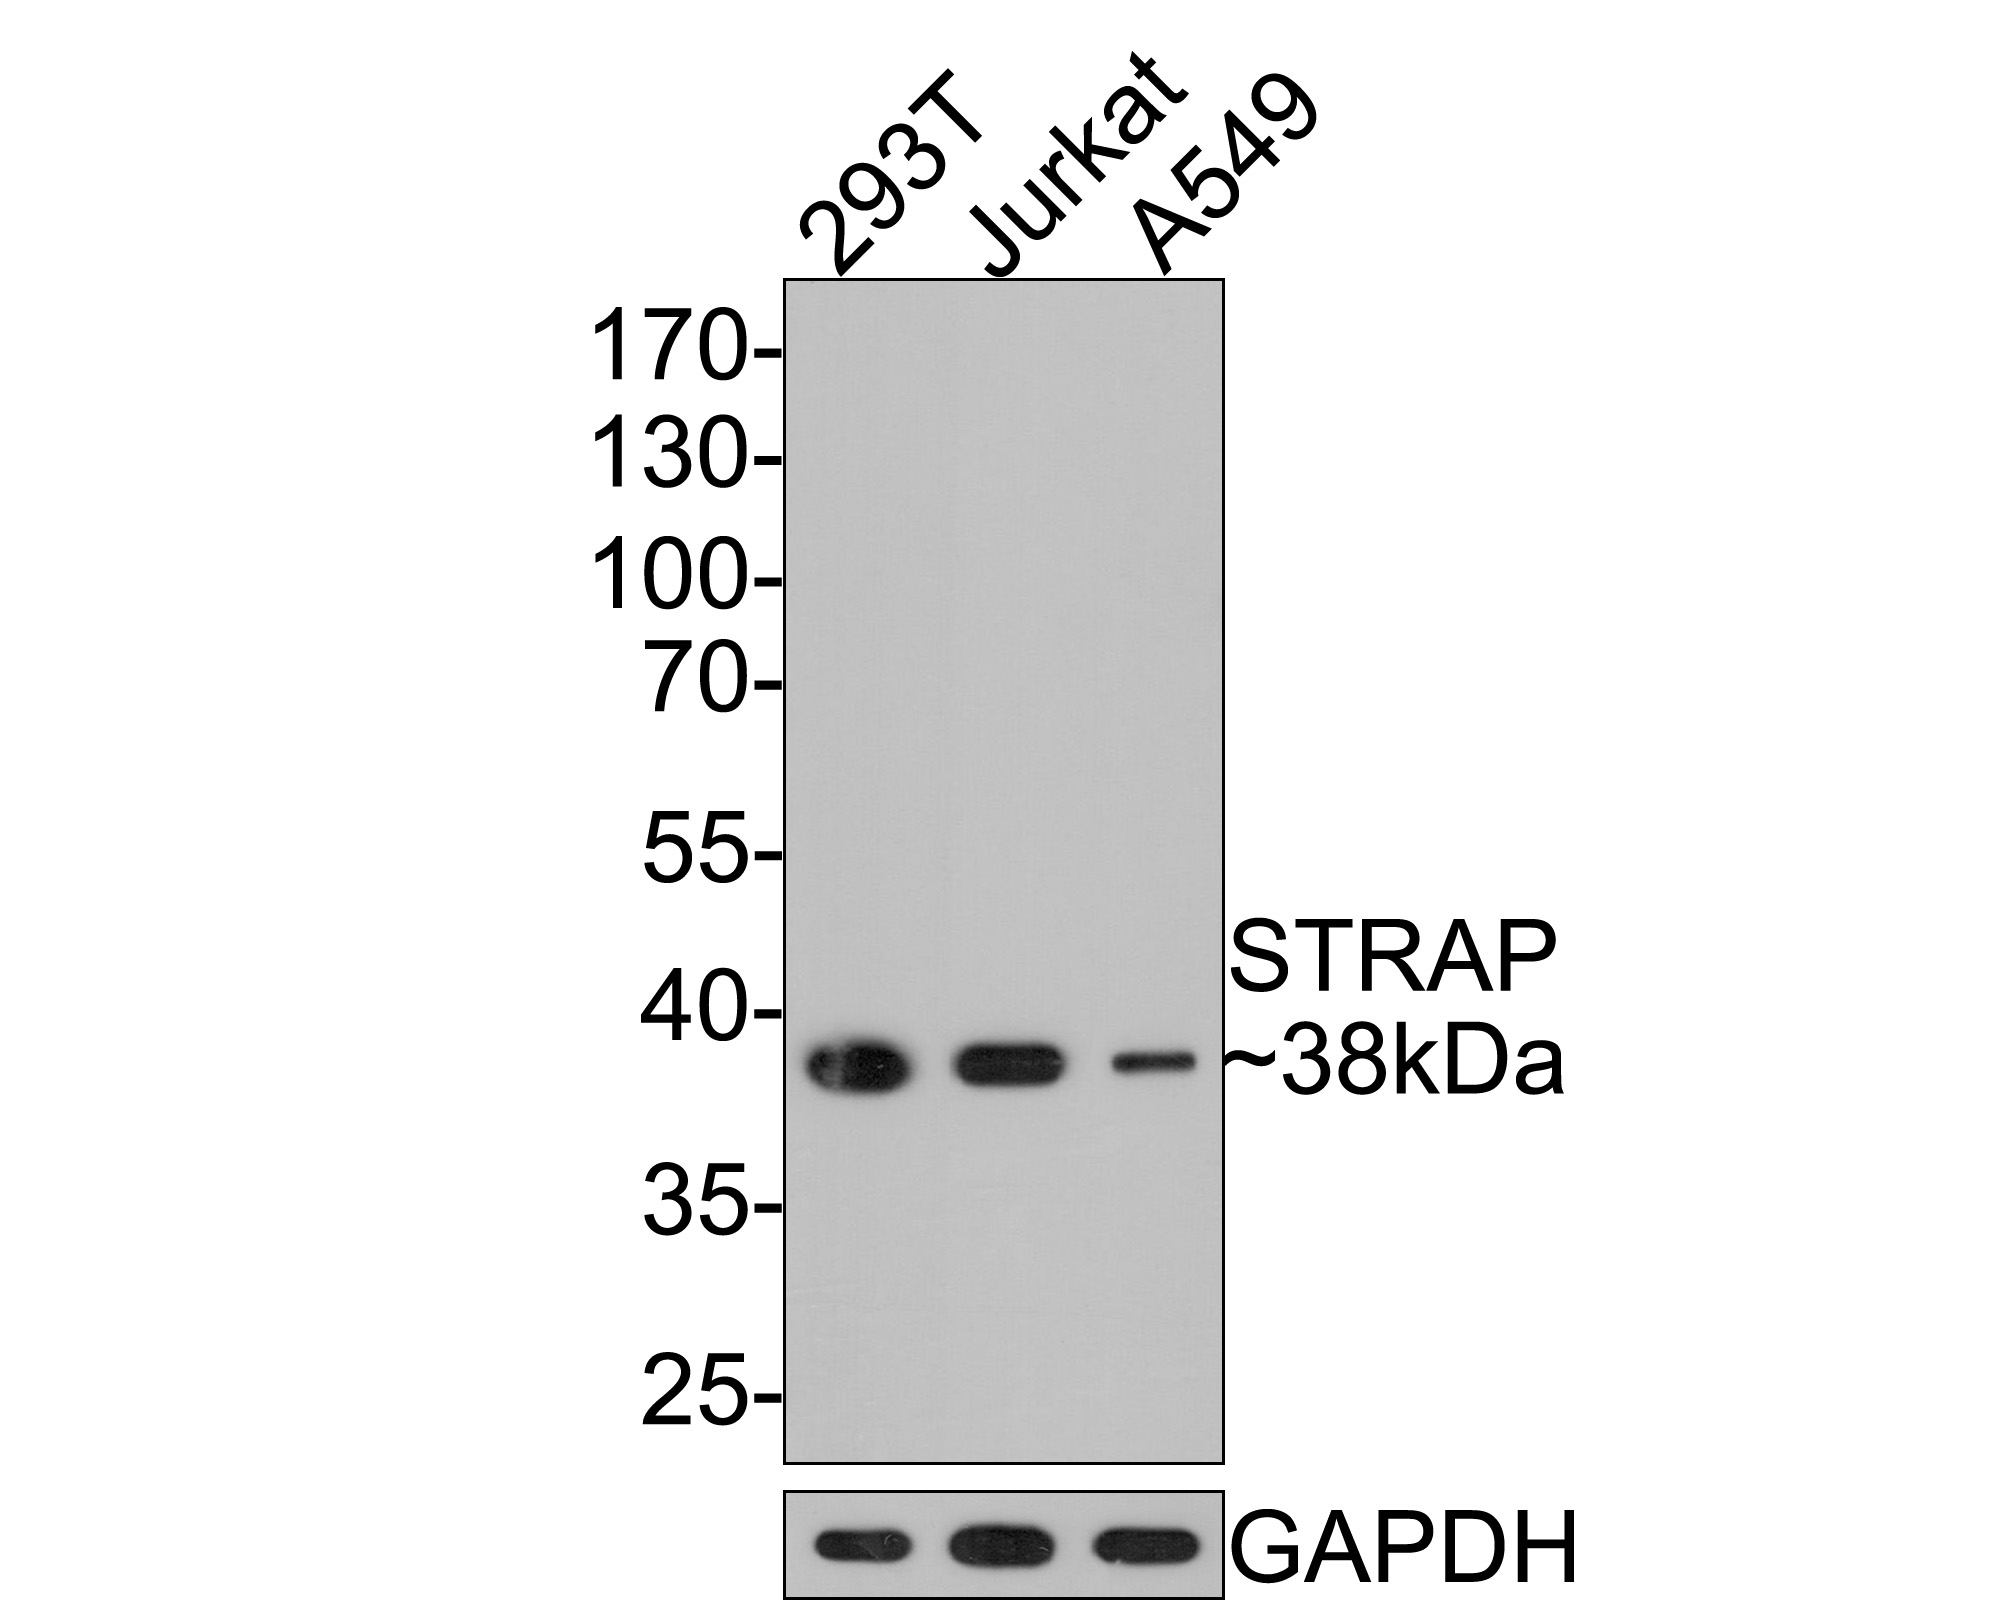 Western blot analysis of STRAP on different lysates with Mouse anti-STRAP antibody (HA601007) at 1/500 dilution.<br />
<br />
Lane 1: 293T cell lysate<br />
Lane 2: Jurkat cell lysate<br />
Lane 3: A549 cell lysate<br />
<br />
Lysates/proteins at 10 µg/Lane.<br />
<br />
Predicted band size: 38 kDa<br />
Observed band size: 38 kDa<br />
<br />
Exposure time: 2 minutes;<br />
<br />
10% SDS-PAGE gel.<br />
<br />
Proteins were transferred to a PVDF membrane and blocked with 5% NFDM/TBST for 1 hour at room temperature. The primary antibody (HA601007) at 1/500 dilution was used in 5% NFDM/TBST at room temperature for 2 hours. Goat Anti-Mouse IgG - HRP Secondary Antibody (HA1006) at 1:100,000 dilution was used for 1 hour at room temperature.